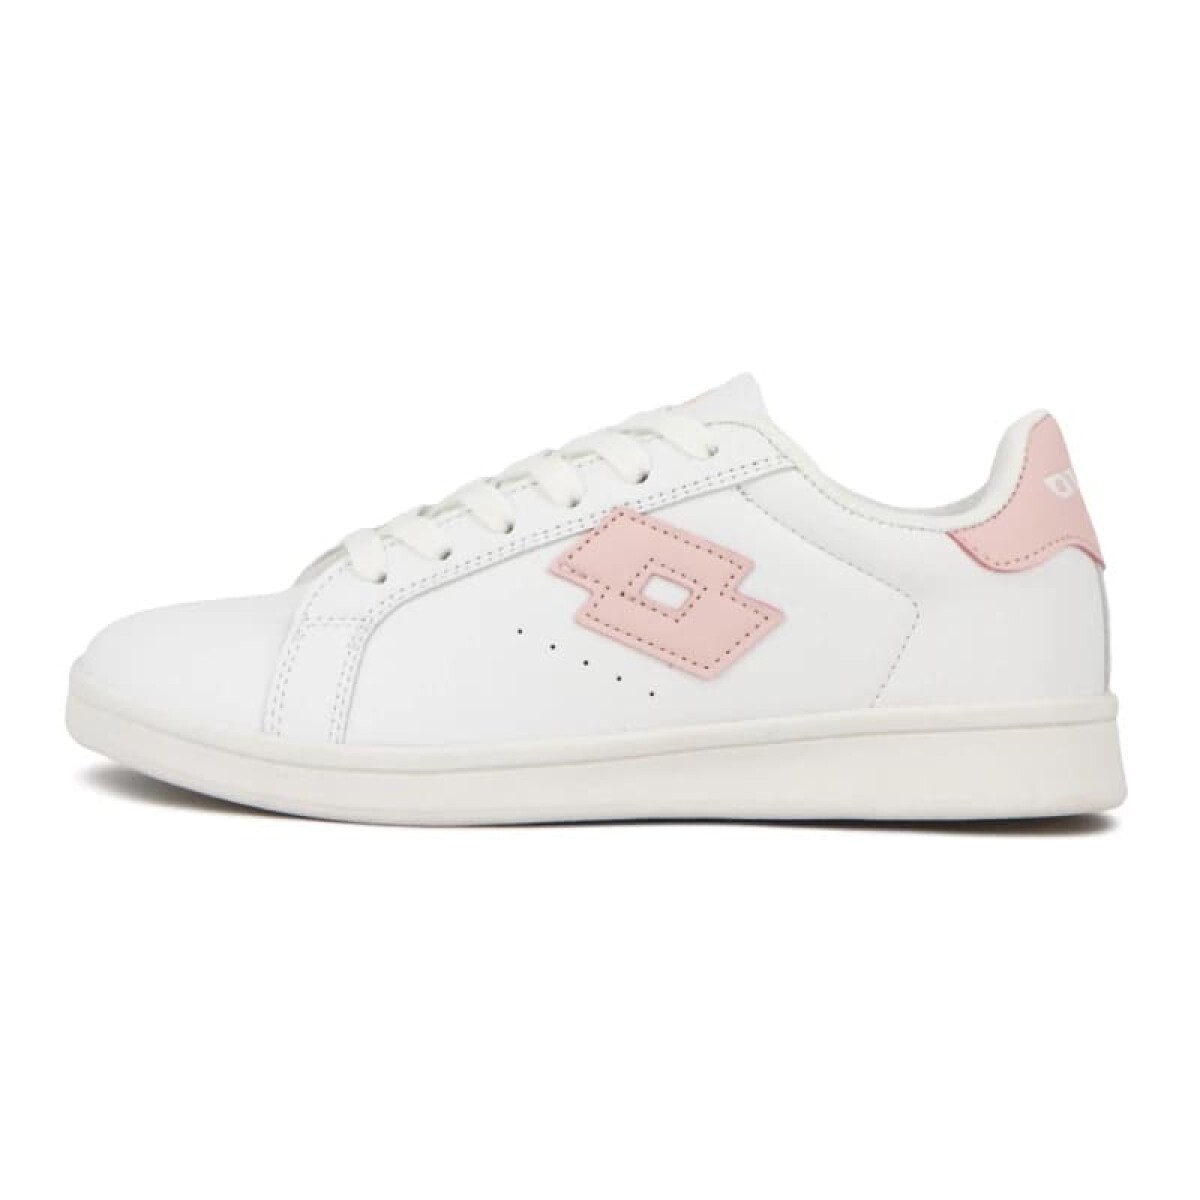 Champion Lotto Mujer Deportivo Casual  White/Pink - S/C 